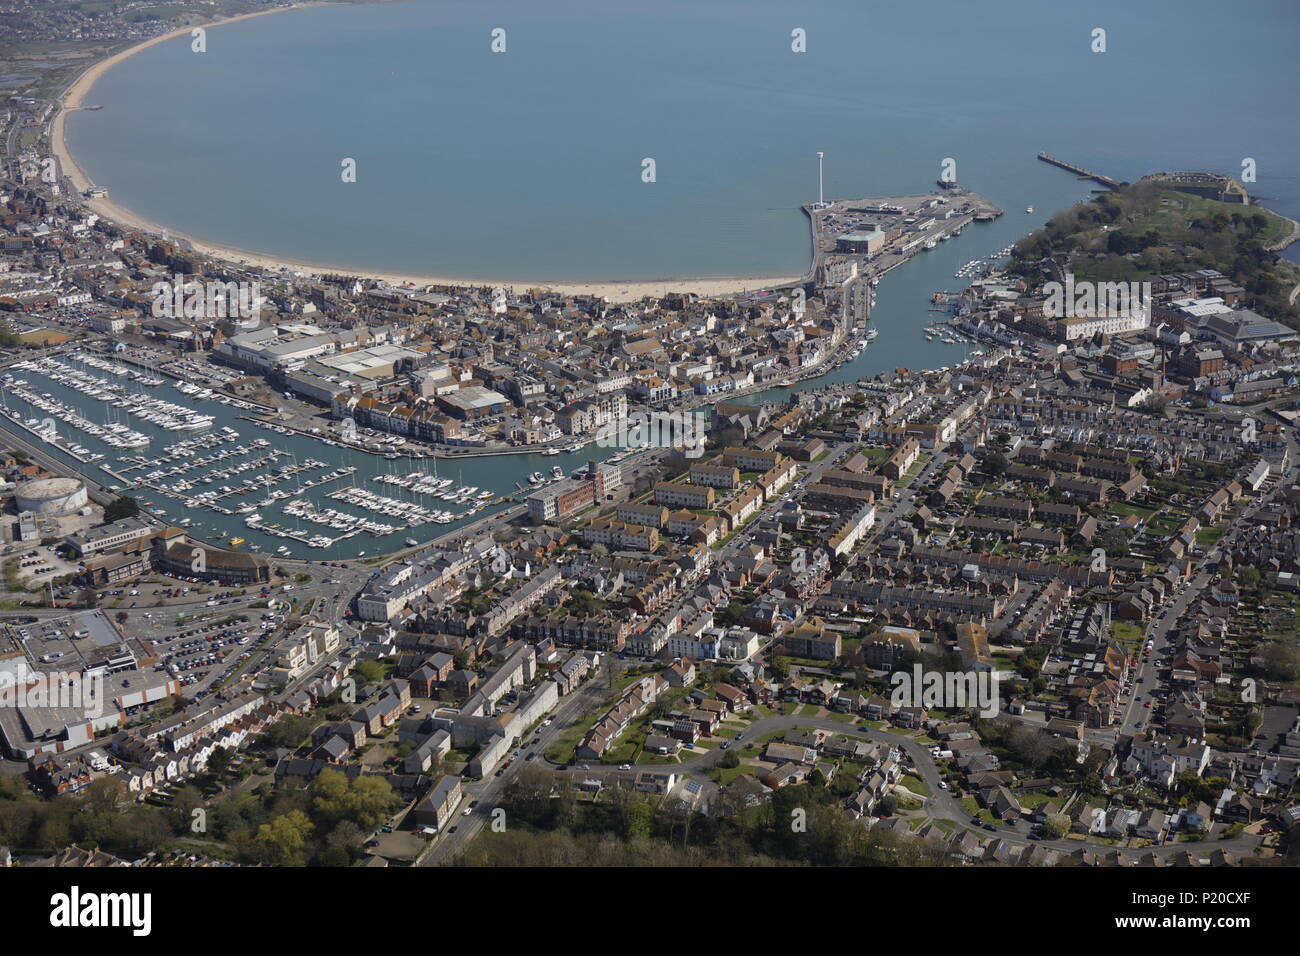 An aerial view of the Dorset seaside town of Weymouth Stock Photo